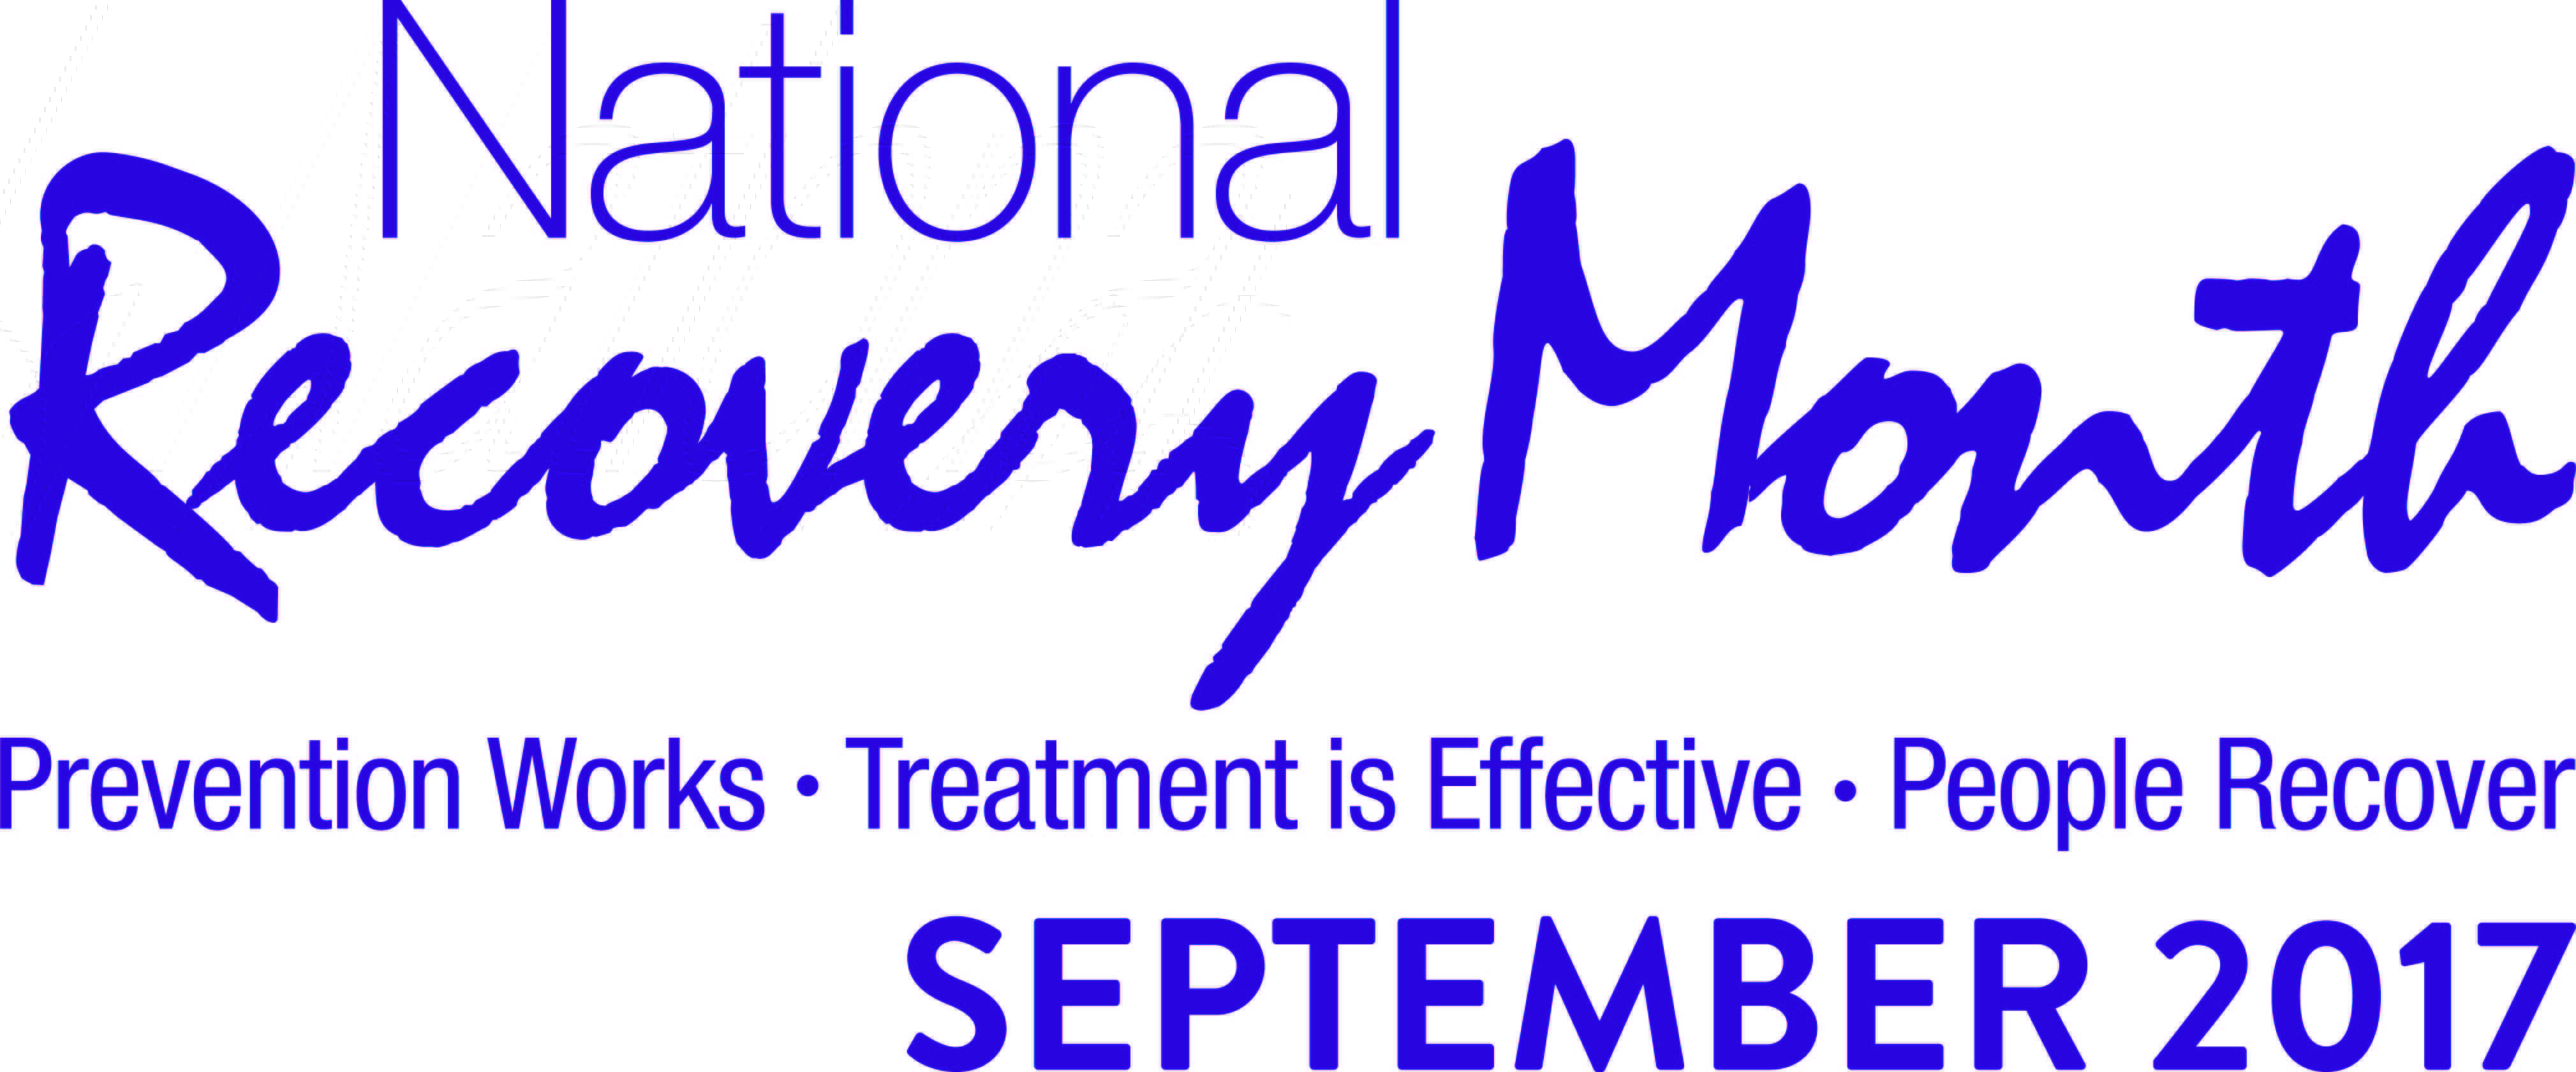 National Recovery Month-Holly Conklin